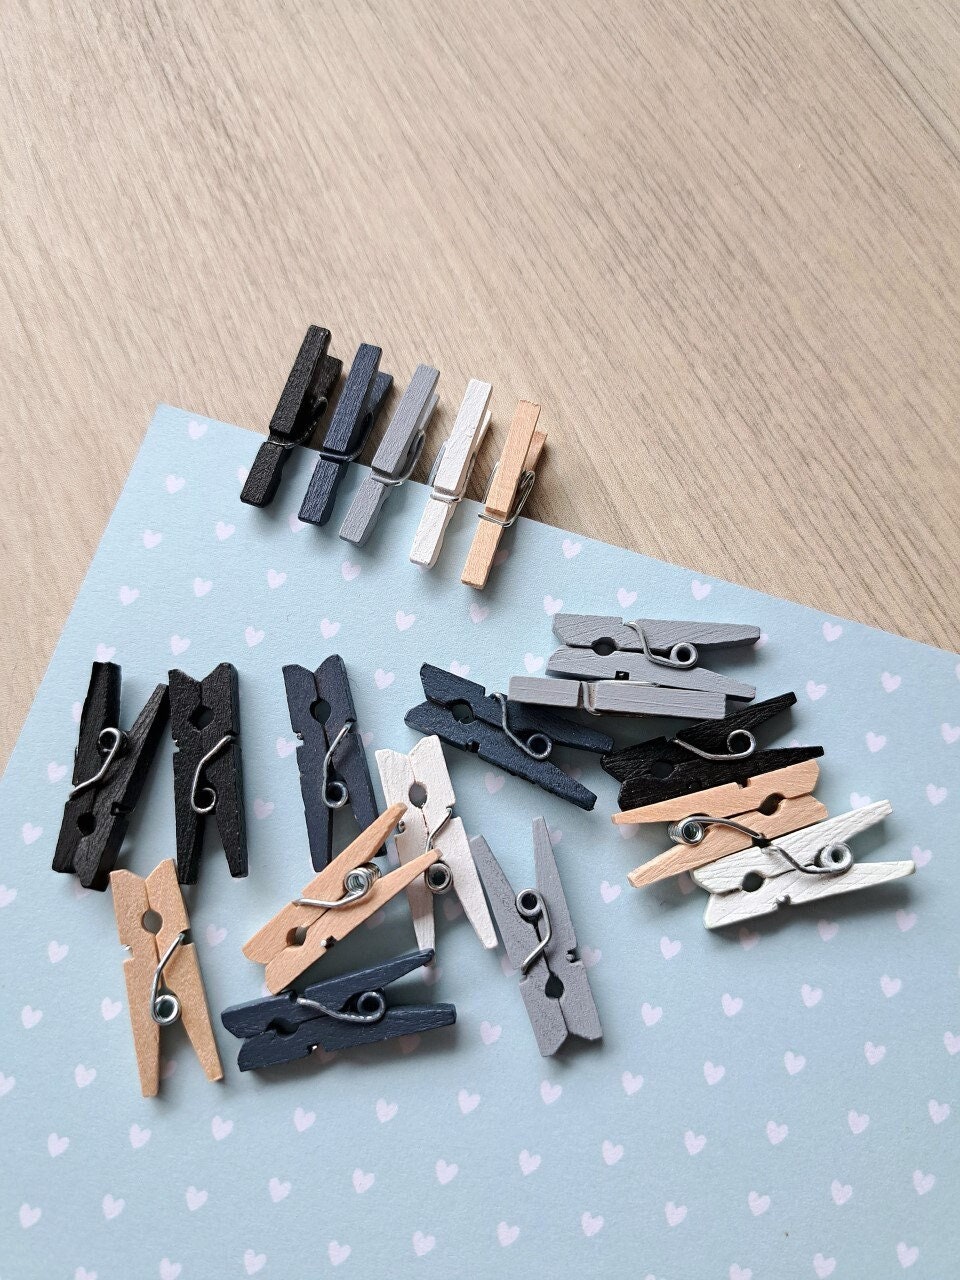 Mini Clothespins,small Clothespins Wood,clothespins Craft,clothespins for  Photos,clothes Pins,photo Hanging Clips,classroom Gift,for Display 